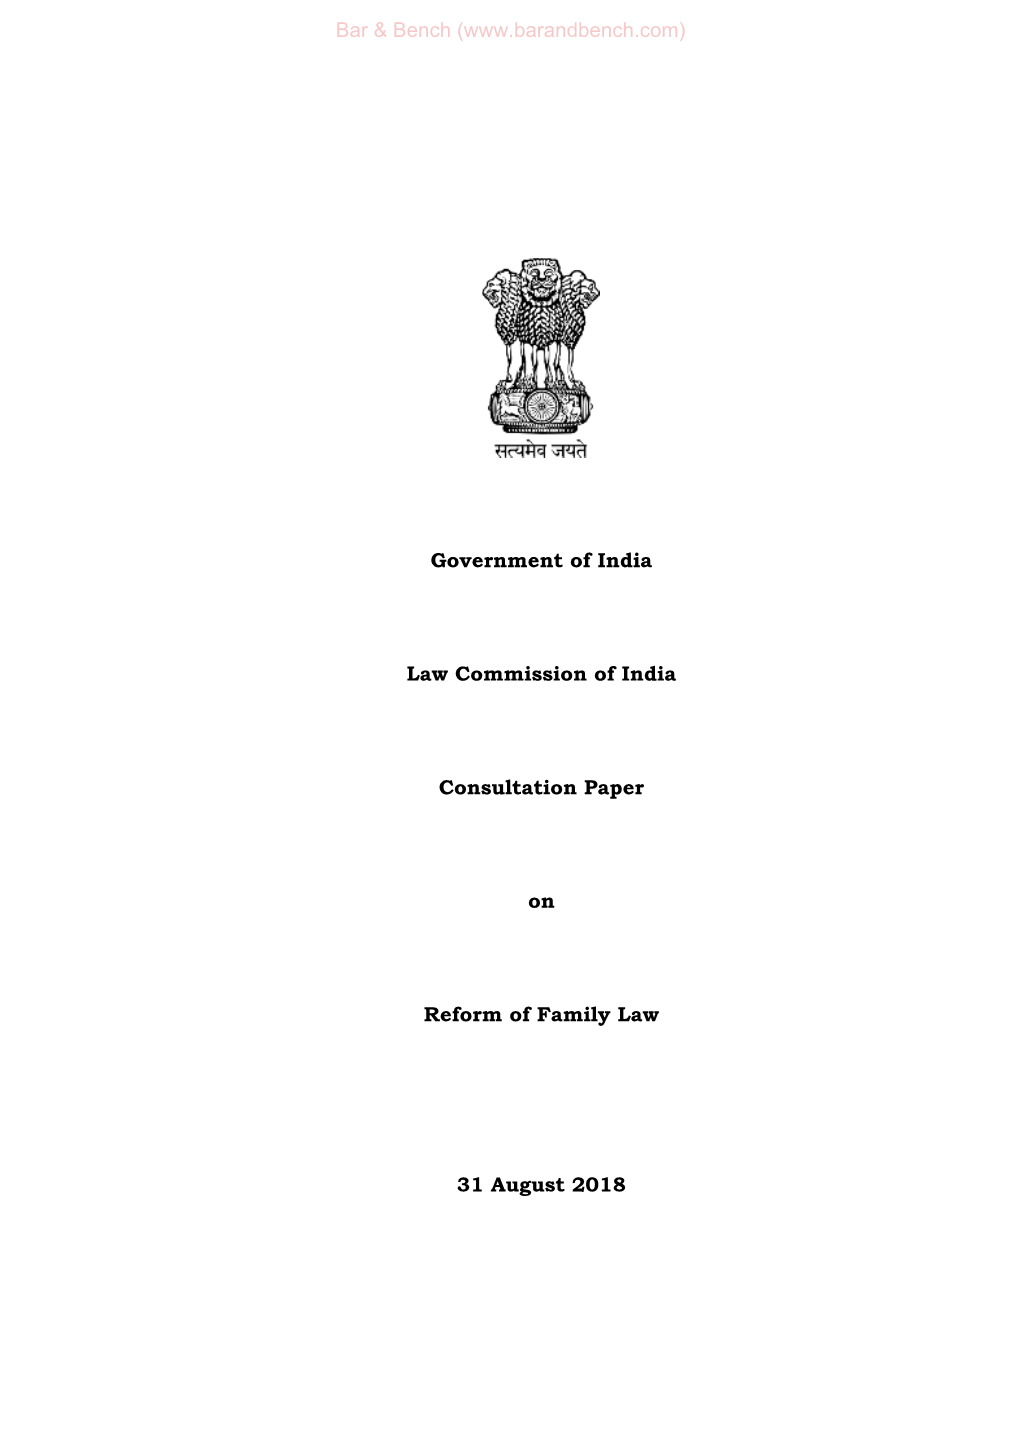 Government of India Law Commission of India Consultation Paper On